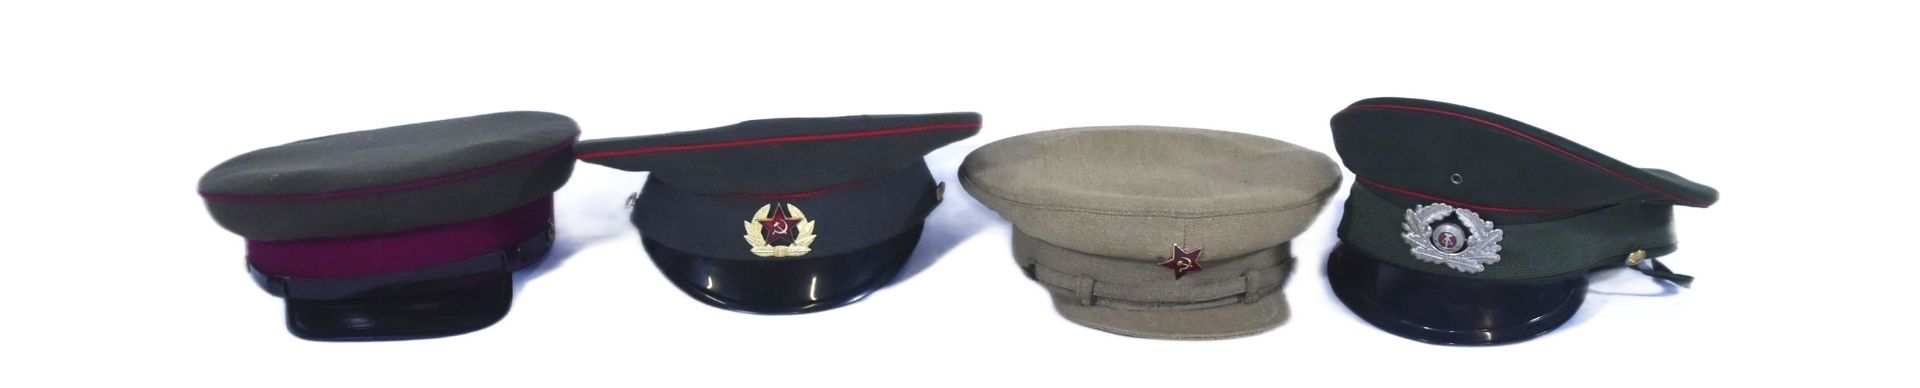 COLLECTION OF VINTAGE POST WAR RUSSIAN MILITARY CAPS